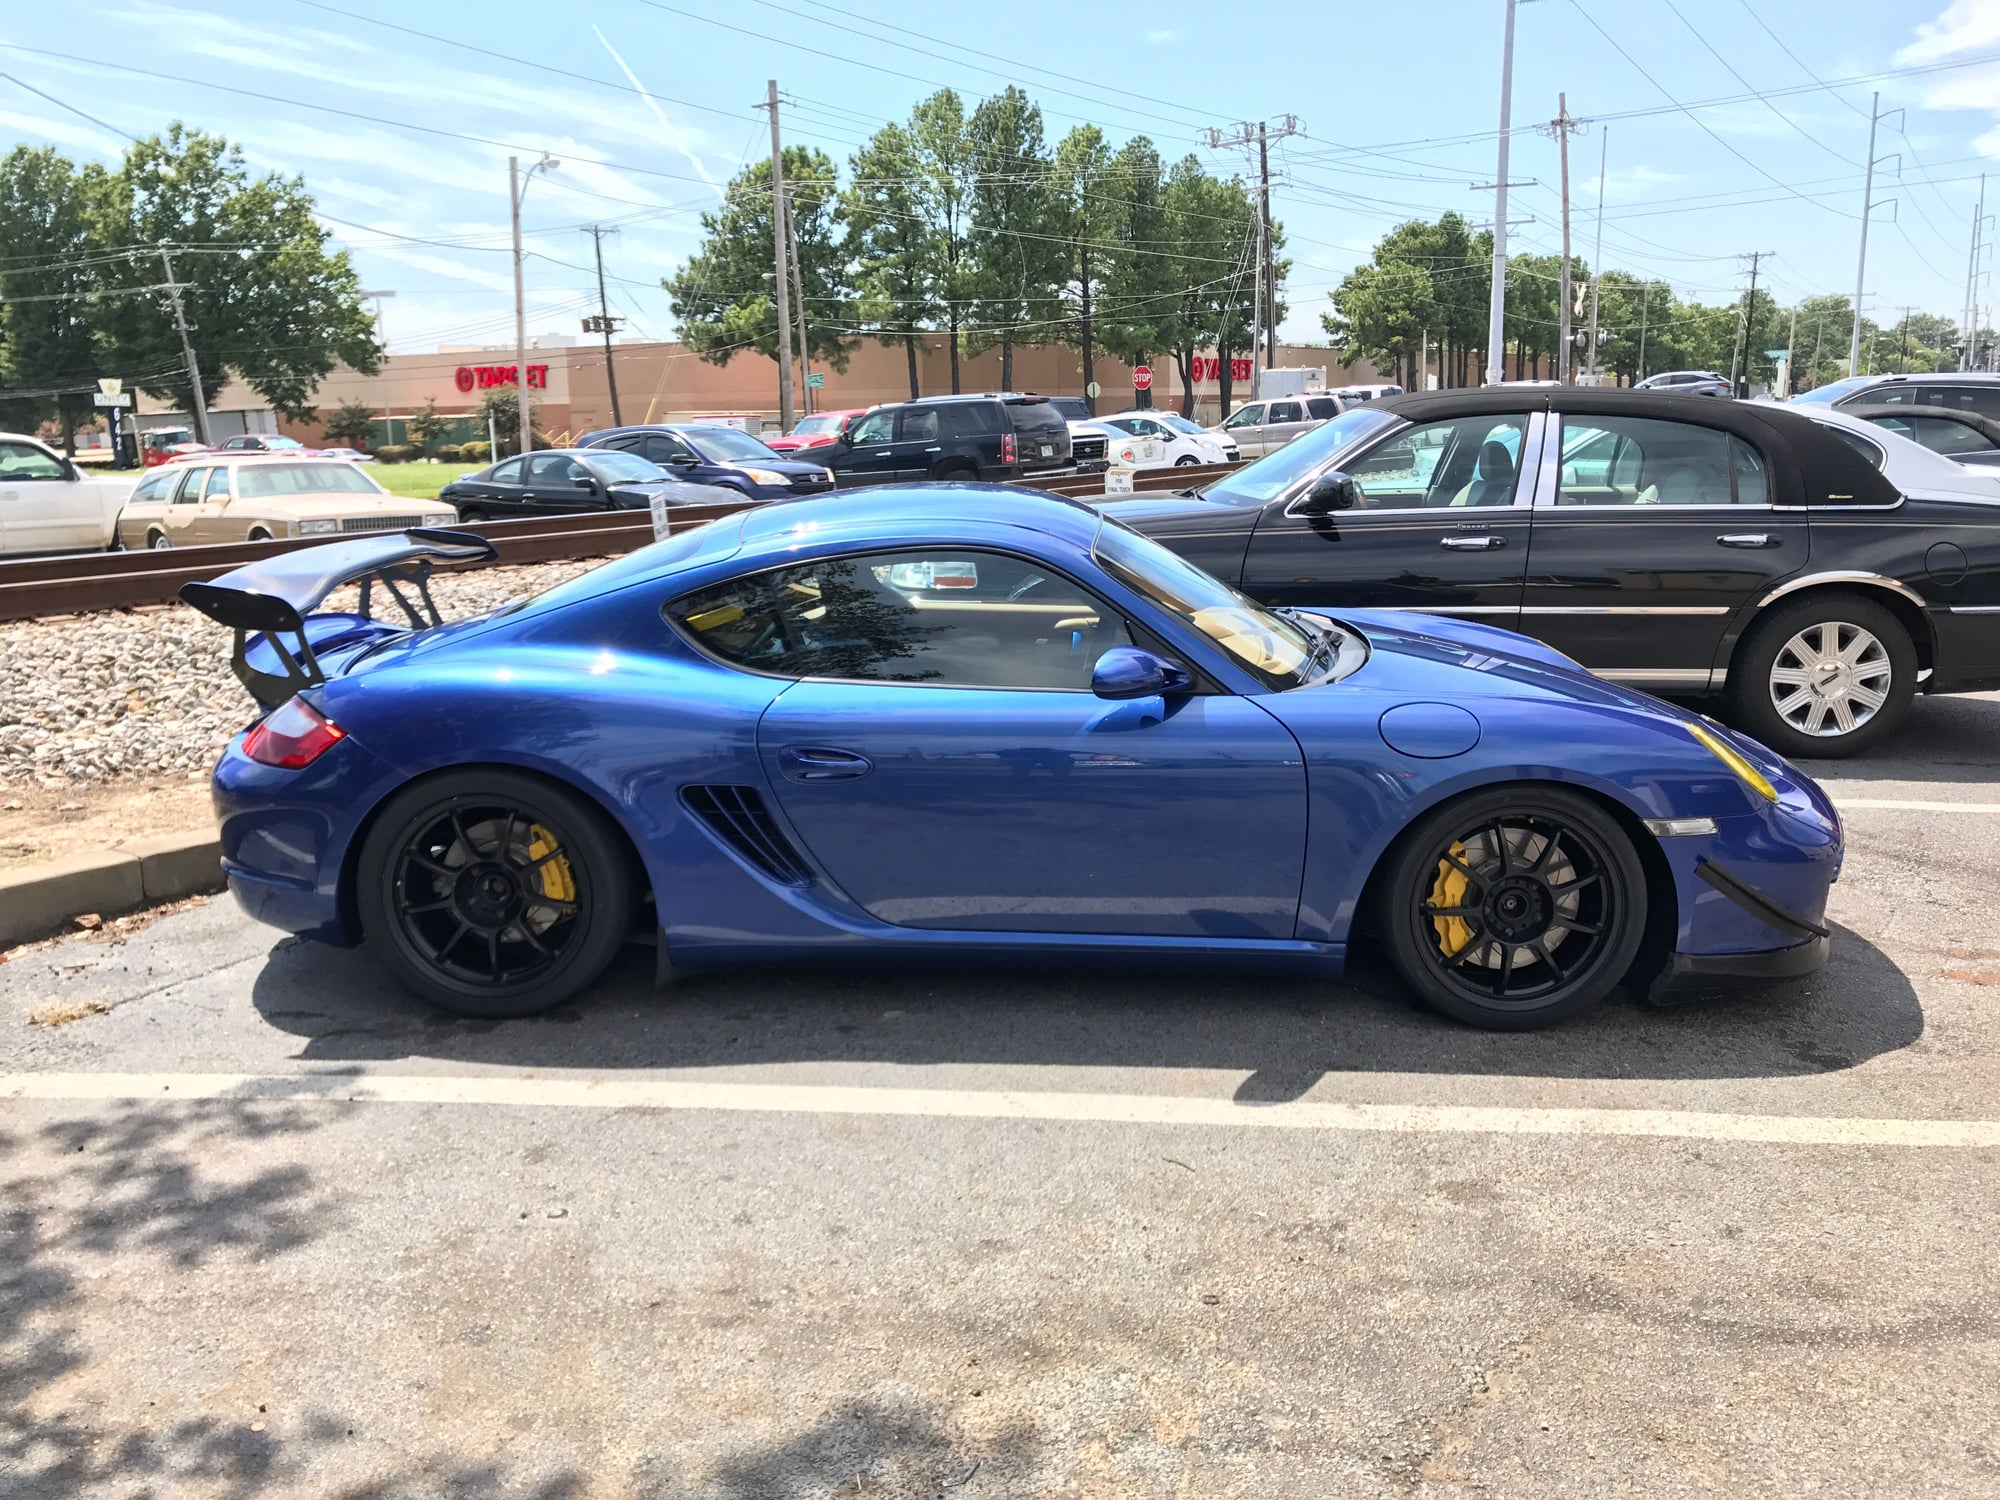 2006 Porsche Cayman - 2006 Cayman S - 4.2L Street / Track Car - Used - VIN WP0AB29836U784601 - 6 cyl - 2WD - Manual - Coupe - Blue - Memphis, TN 38112, United States